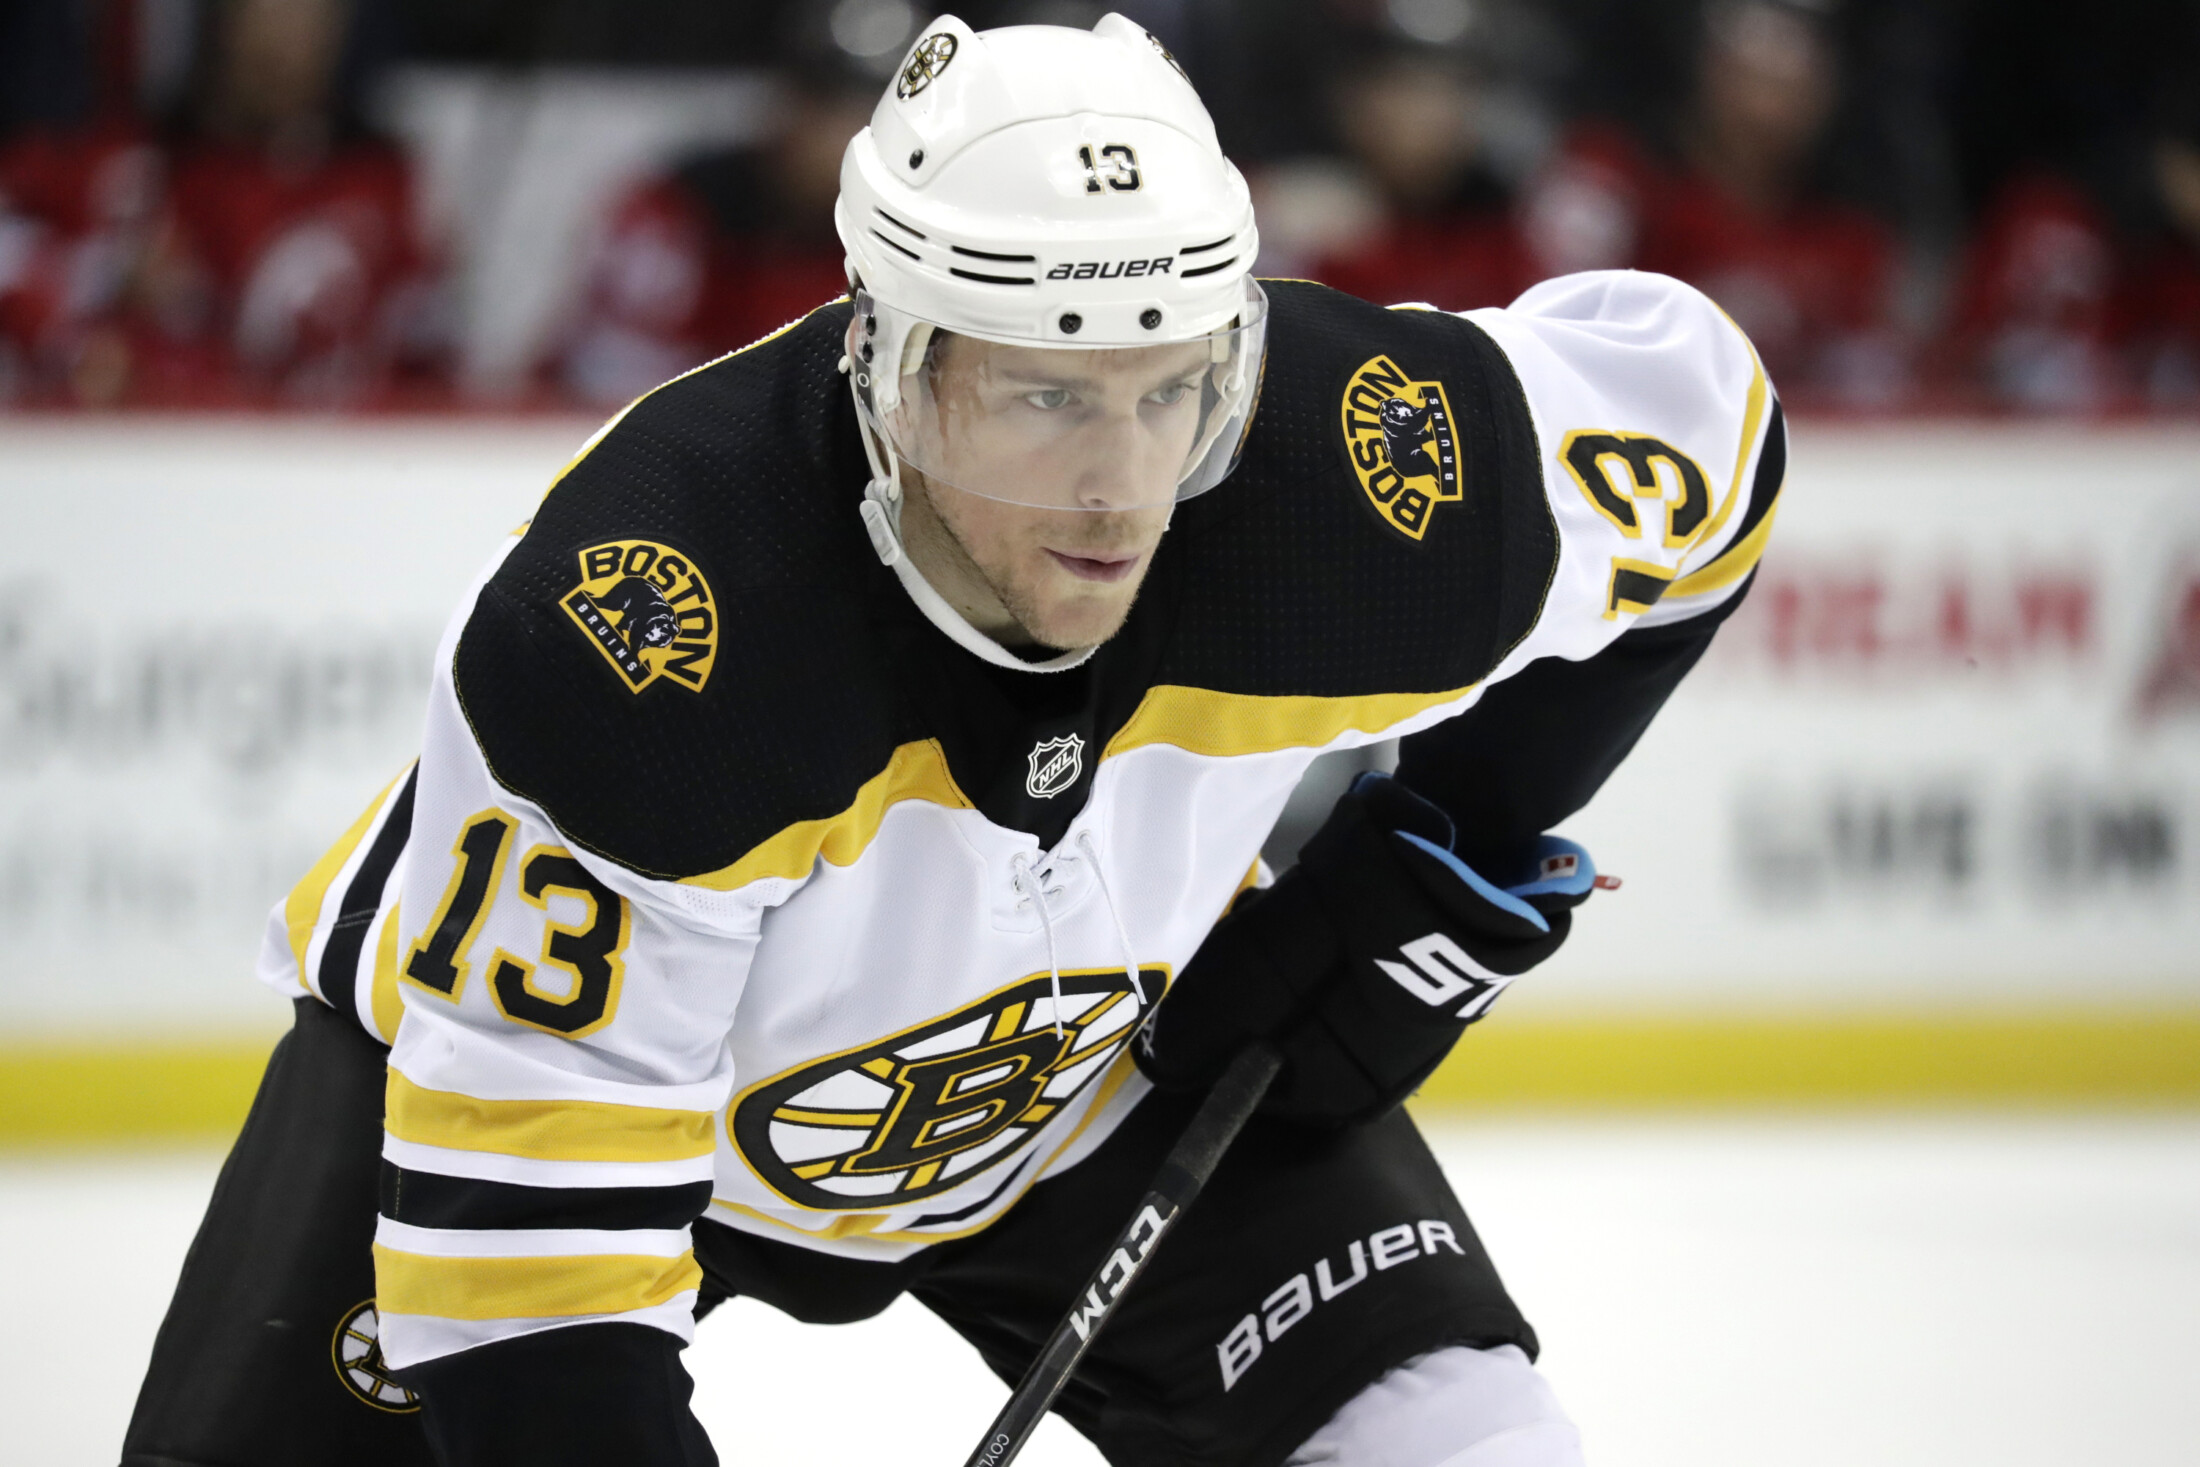 Charlie Coyle, Marcus Johansson grateful for playoff opportunity